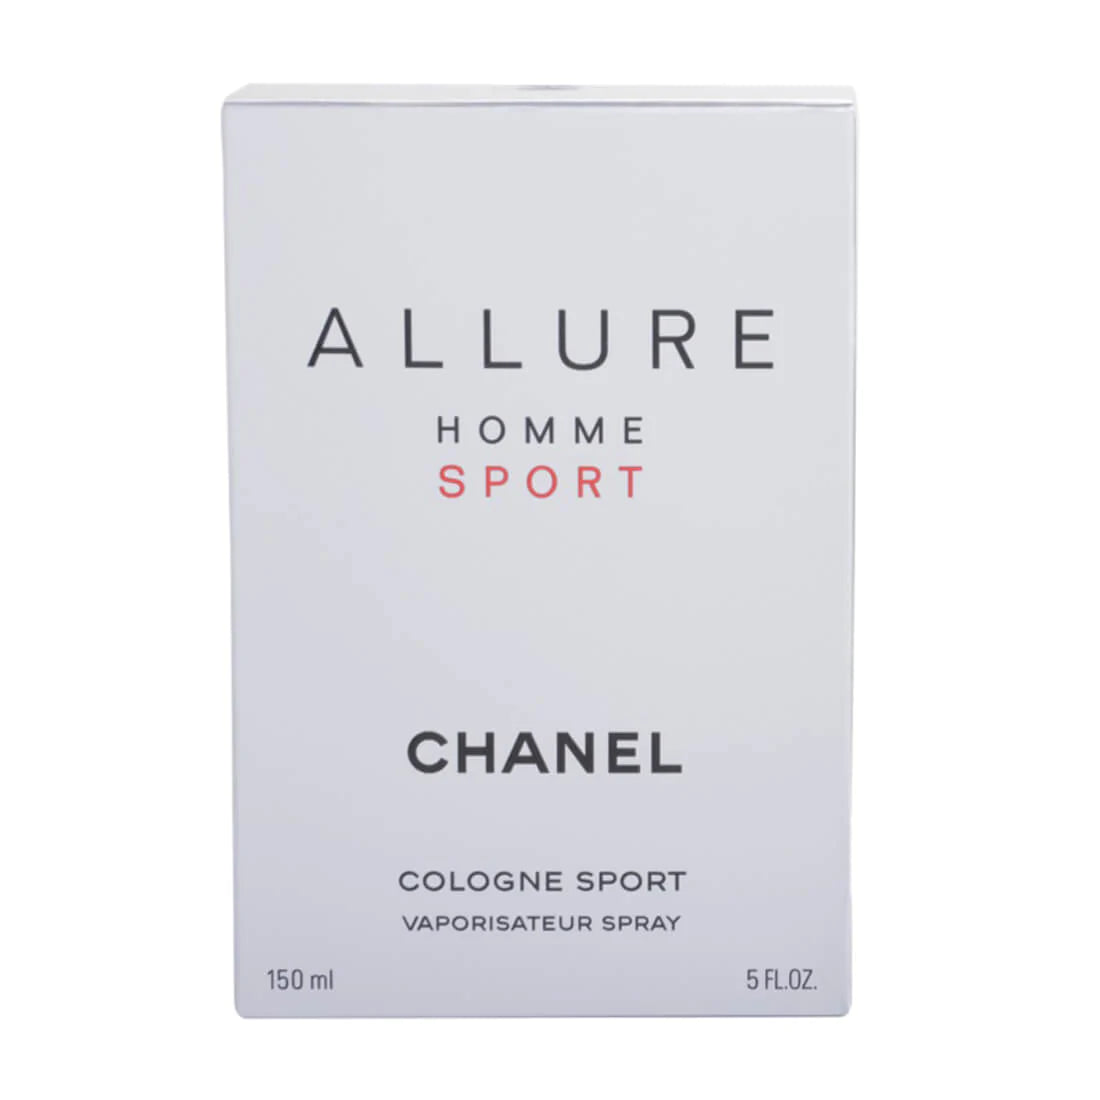 Chanel Allure homme sport cologne 80/100ml